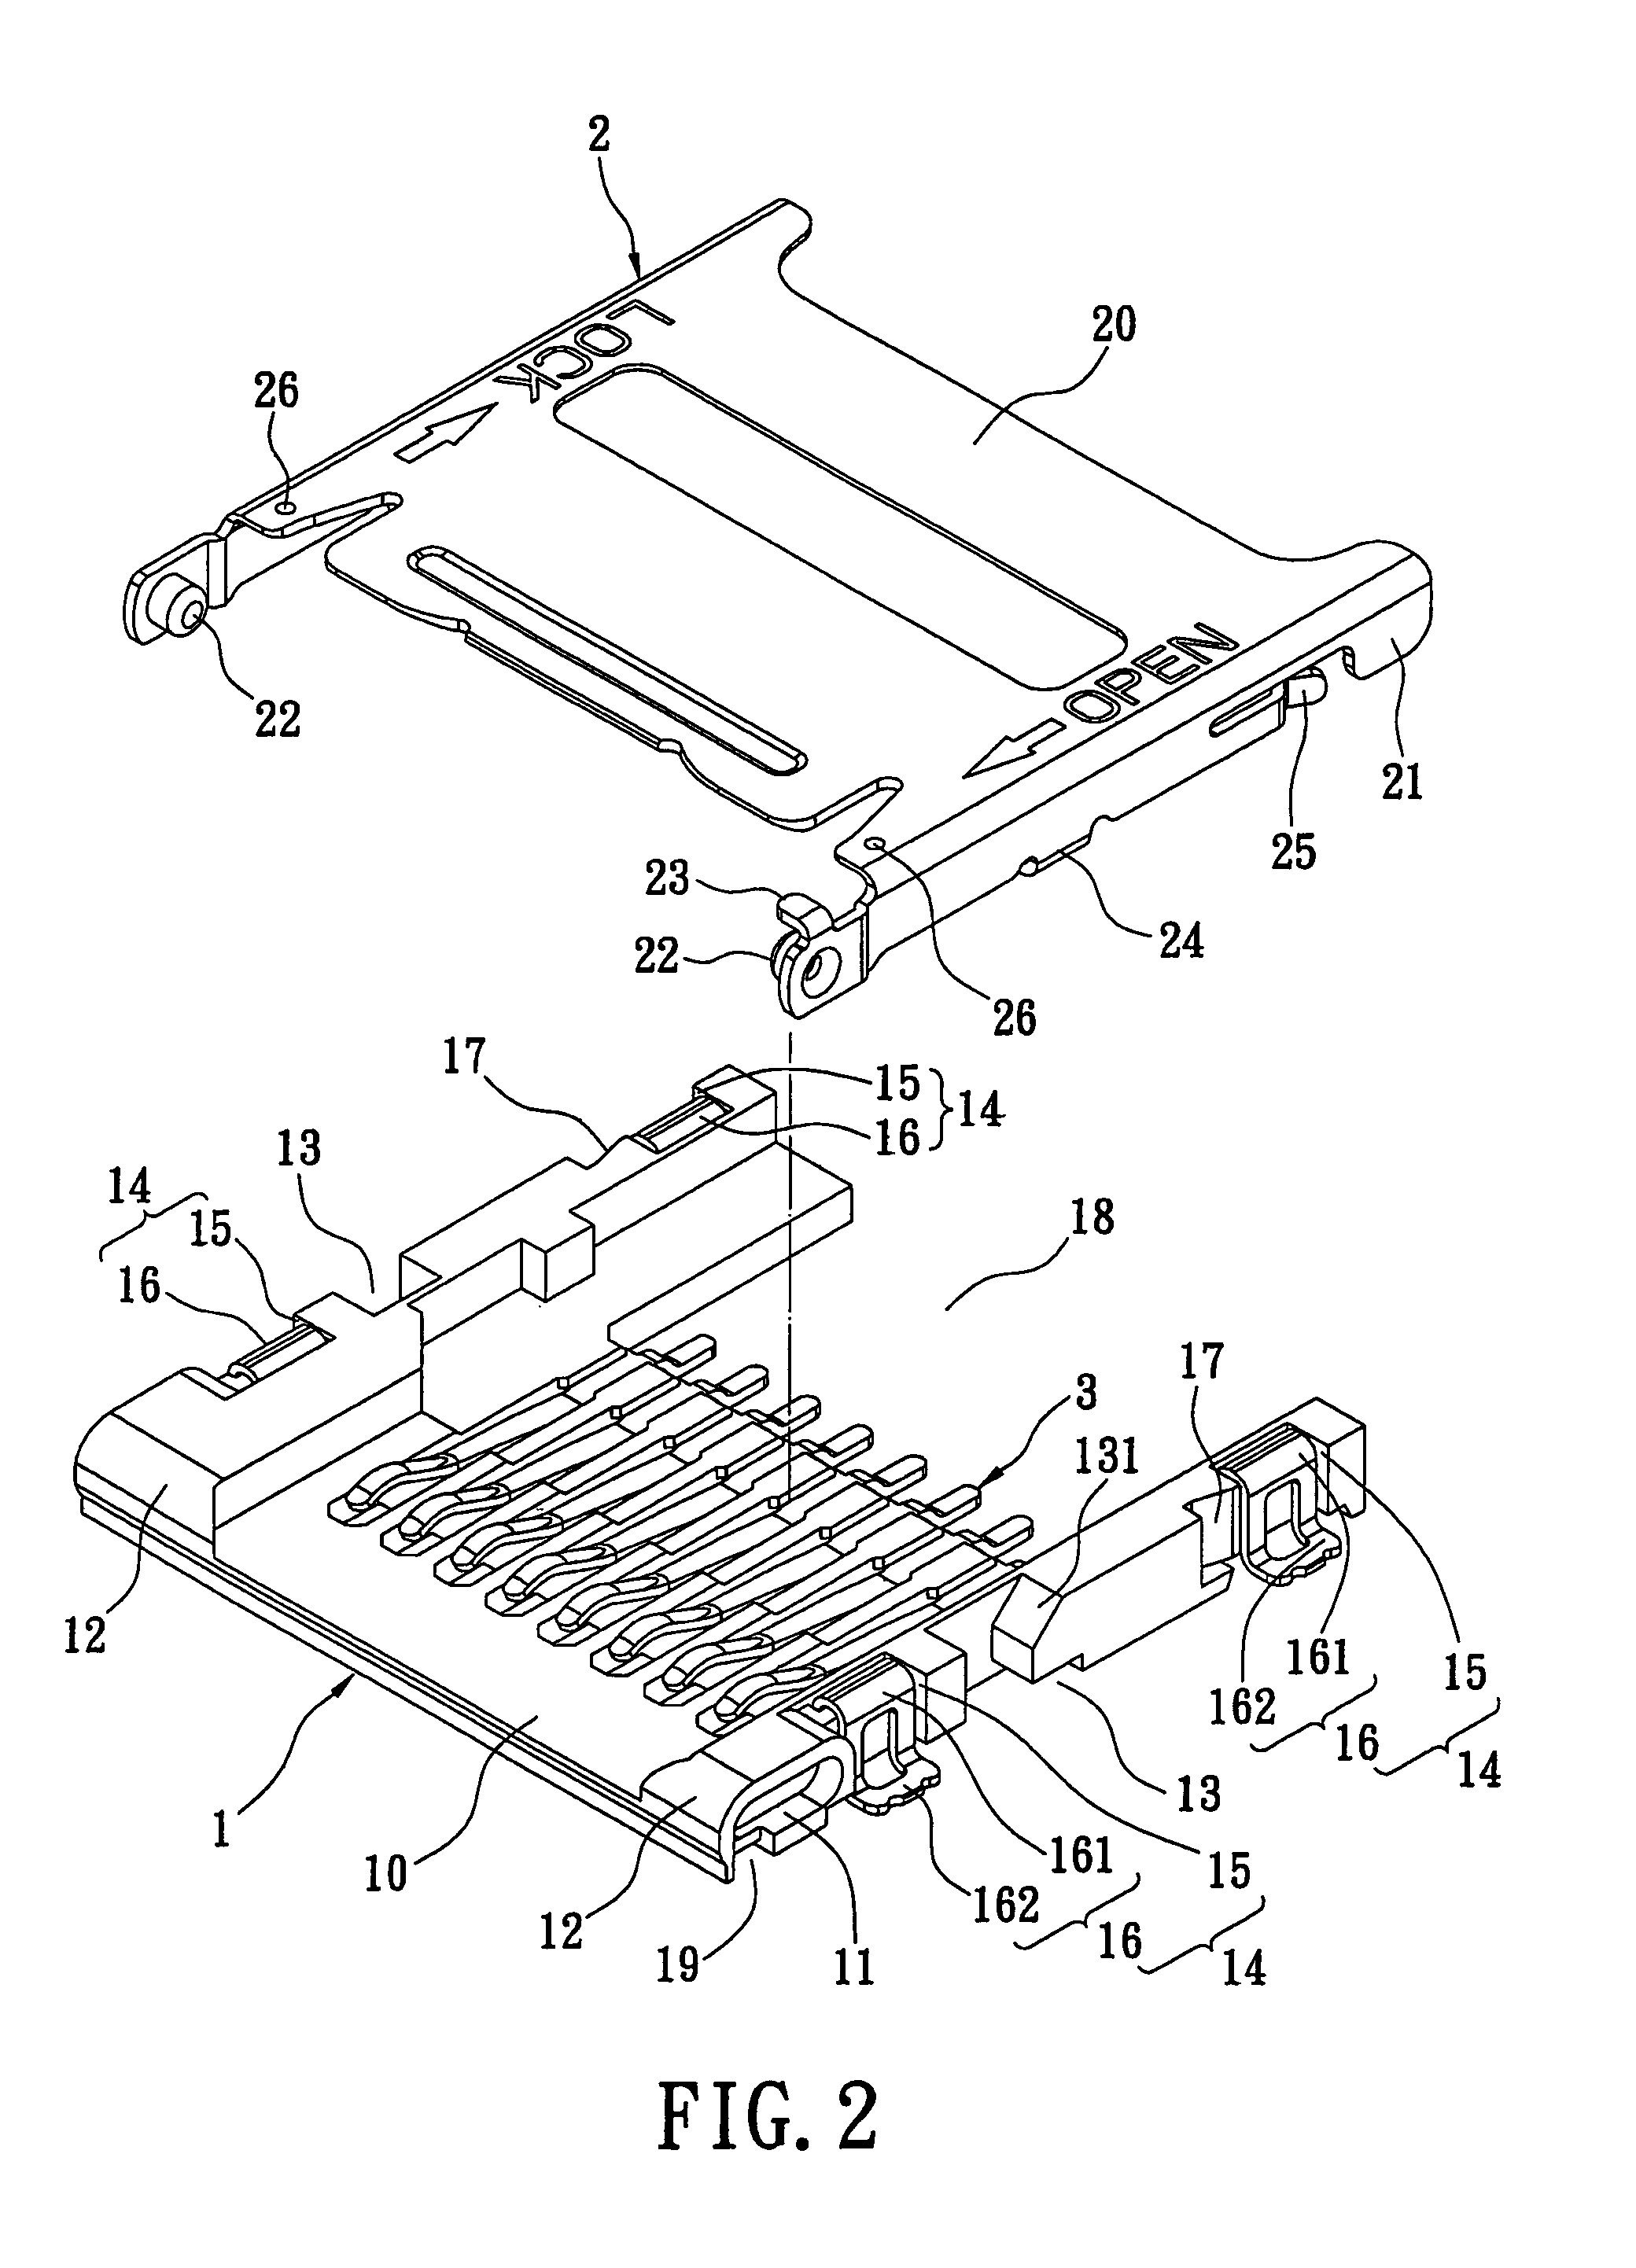 Electrical card connector including a locking mechanism